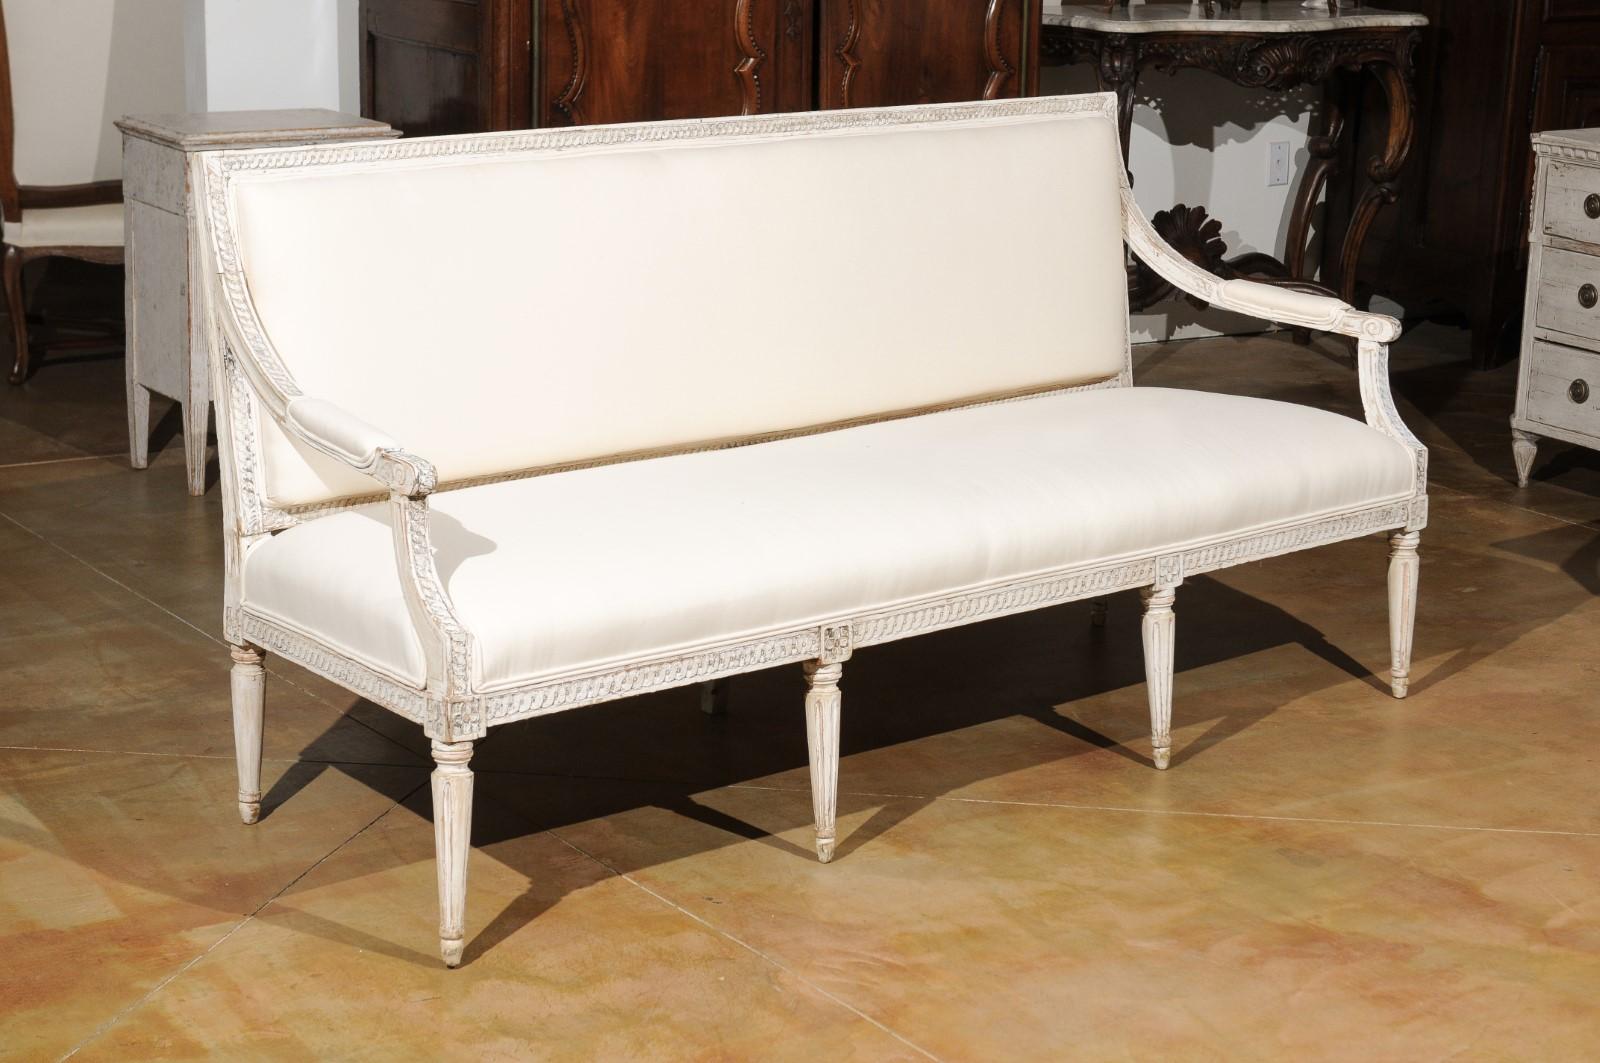 A Swedish Neoclassical style painted wood sofa from the 19th century, with scrolled arms, guilloche motifs, fluted legs and new upholstery. Born in Sweden during the 19th century, this elegant sofa features a rectangular back adorned with guilloche